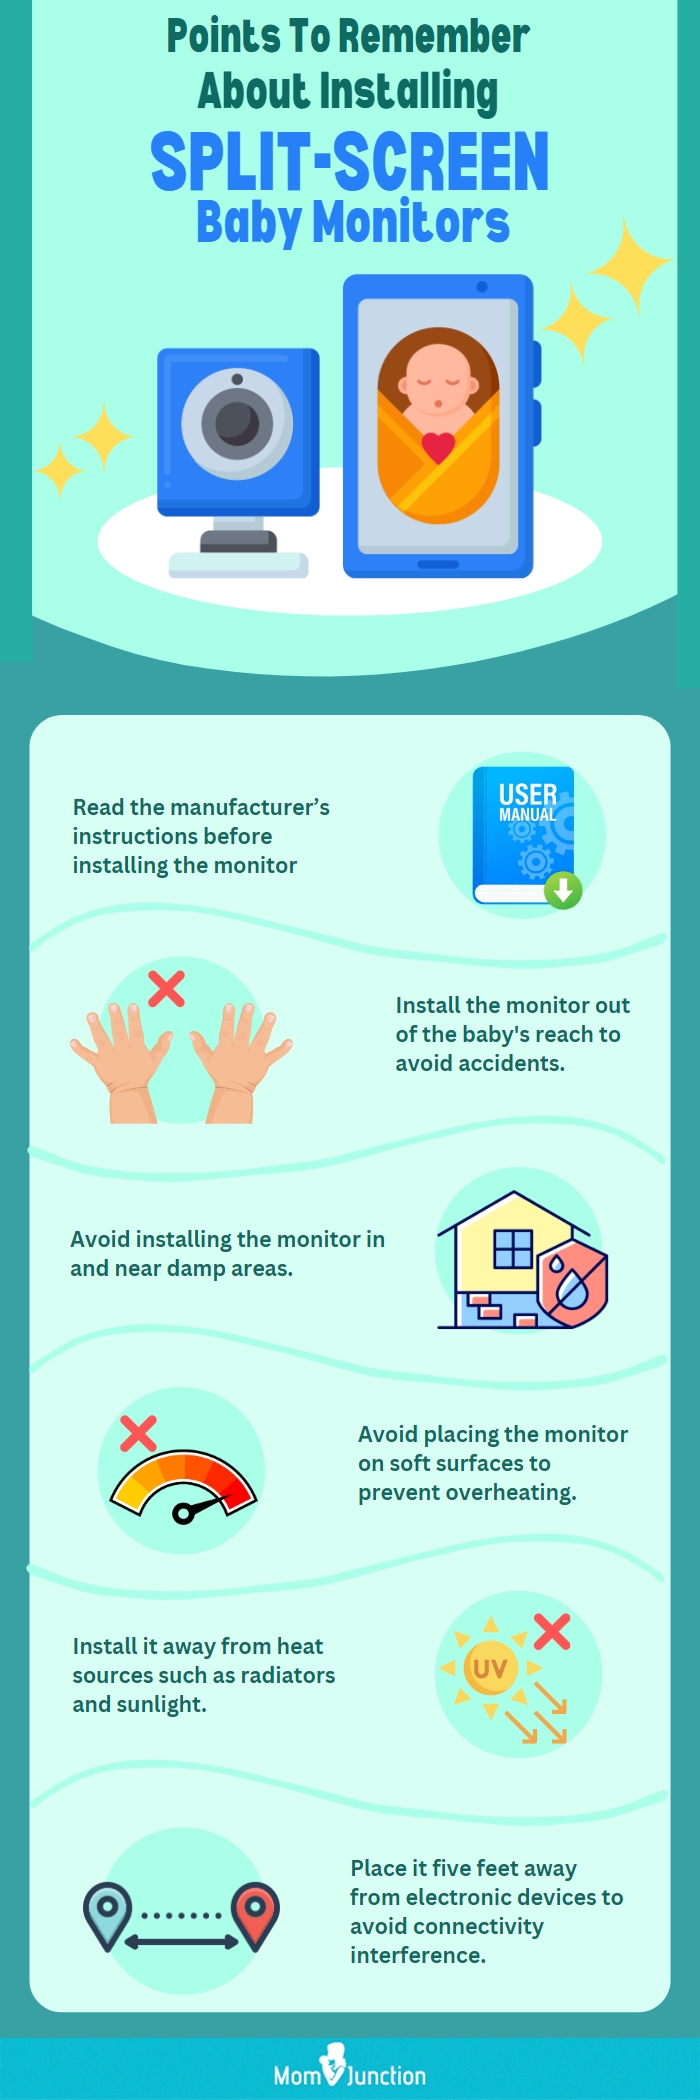 Points To Remember About Installing Split-Screen Baby Monitors(infographic)